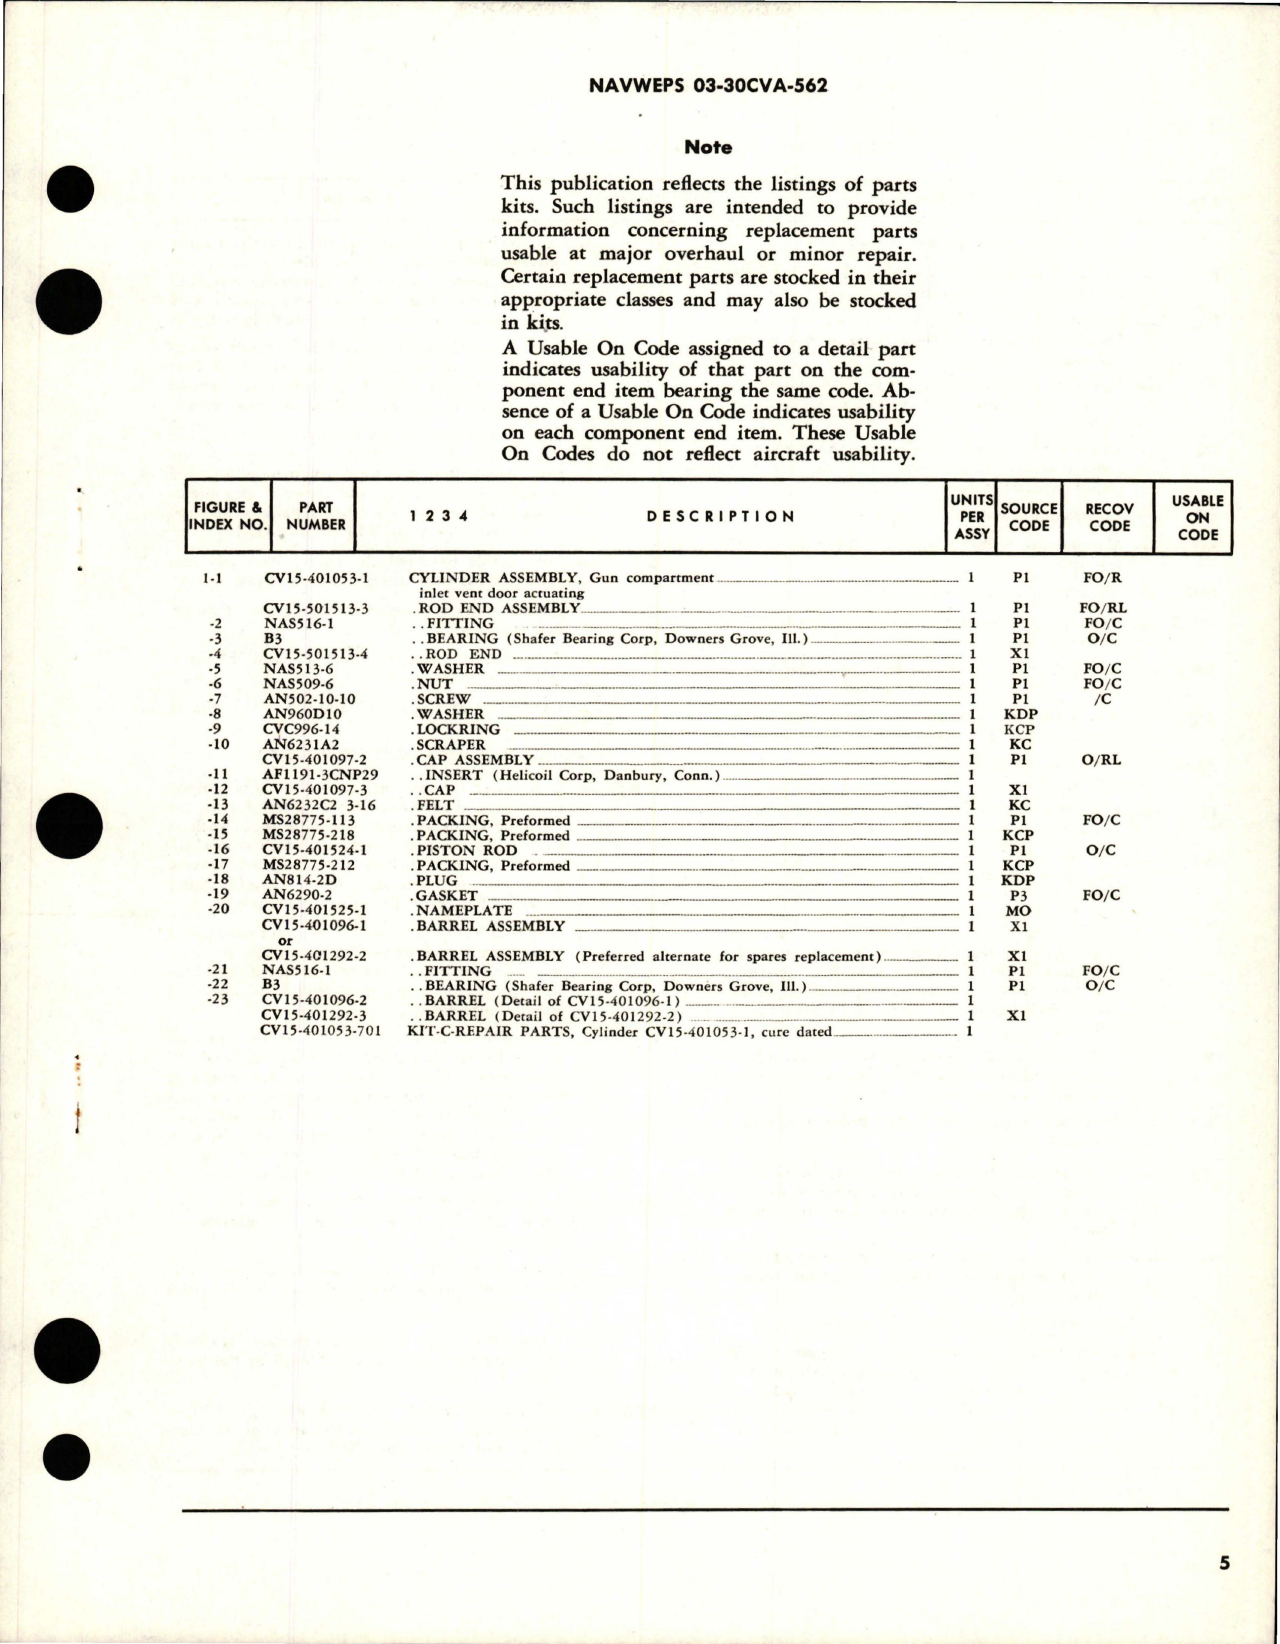 Sample page 5 from AirCorps Library document: Overhaul Instructions with Parts for Door Actuating Gun Compartment Inlet Vent Cylinder Assembly - CV15-401503-1